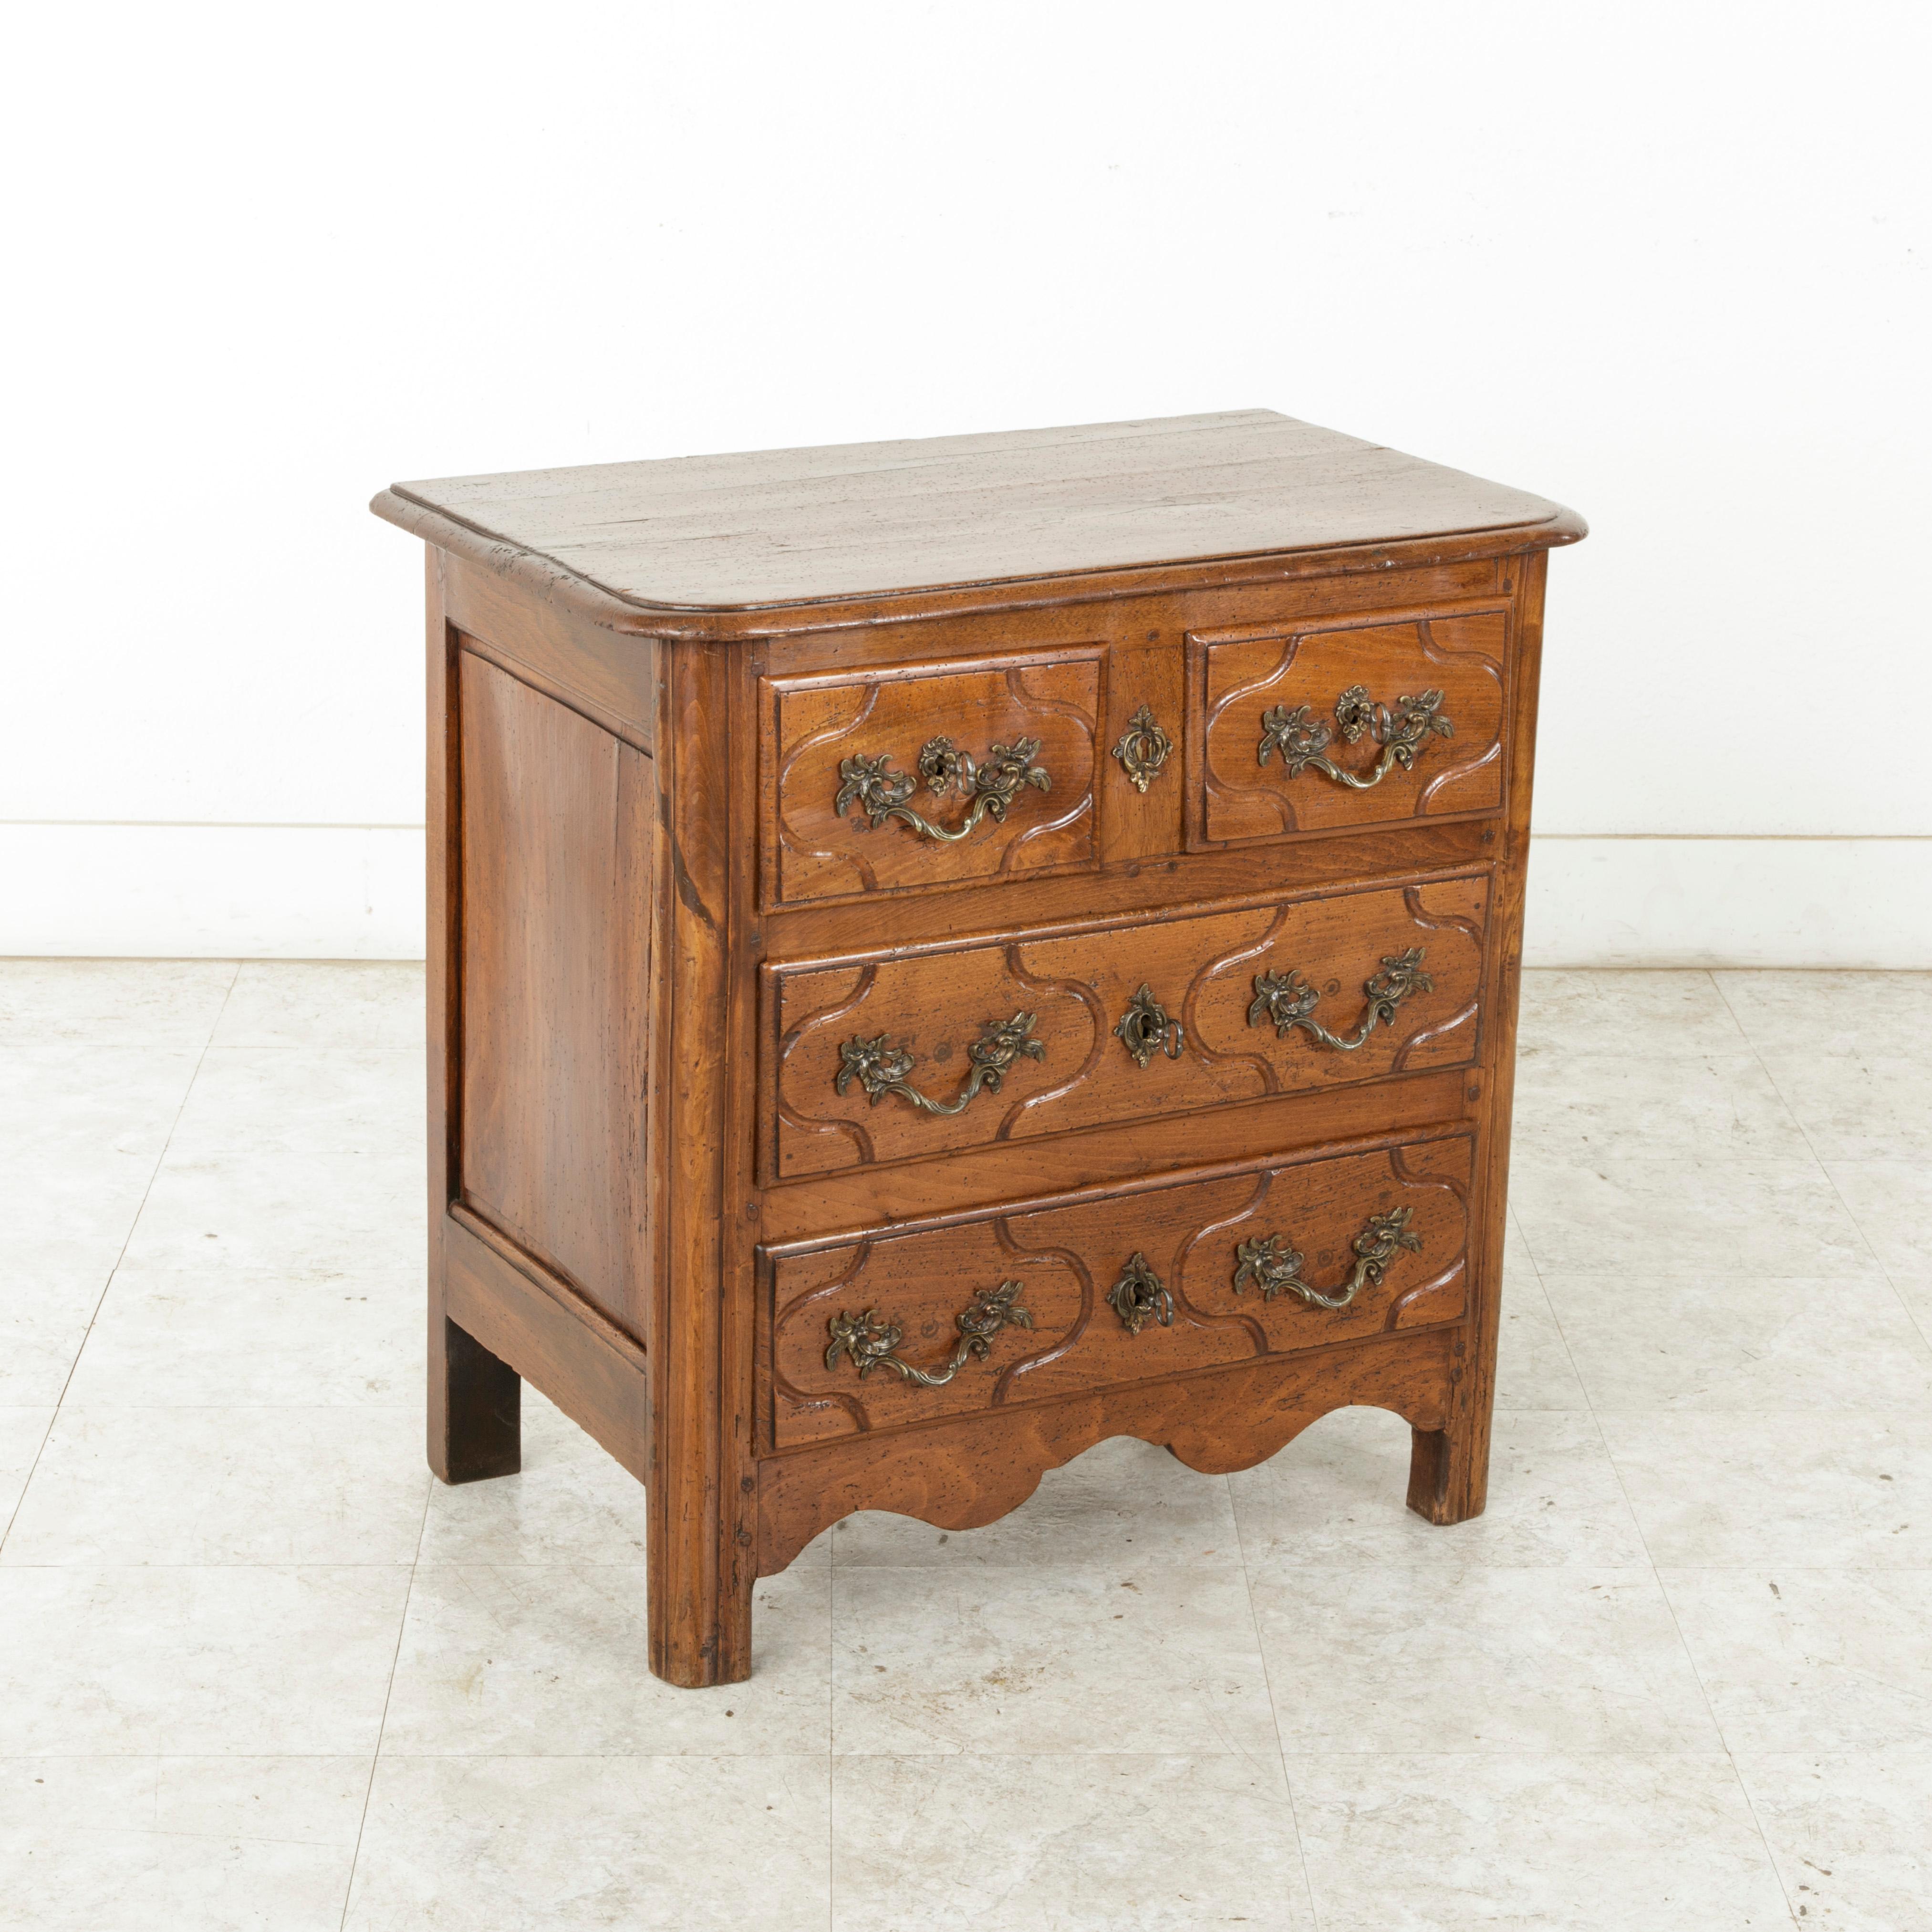 This mid-18th century French Louis XIV period hand carved chestnut commode or chest is from the Ile de France region surrounding Paris. Of an unusual small scale originally meant for a Paris apartment, this piece features four drawers of dovetail